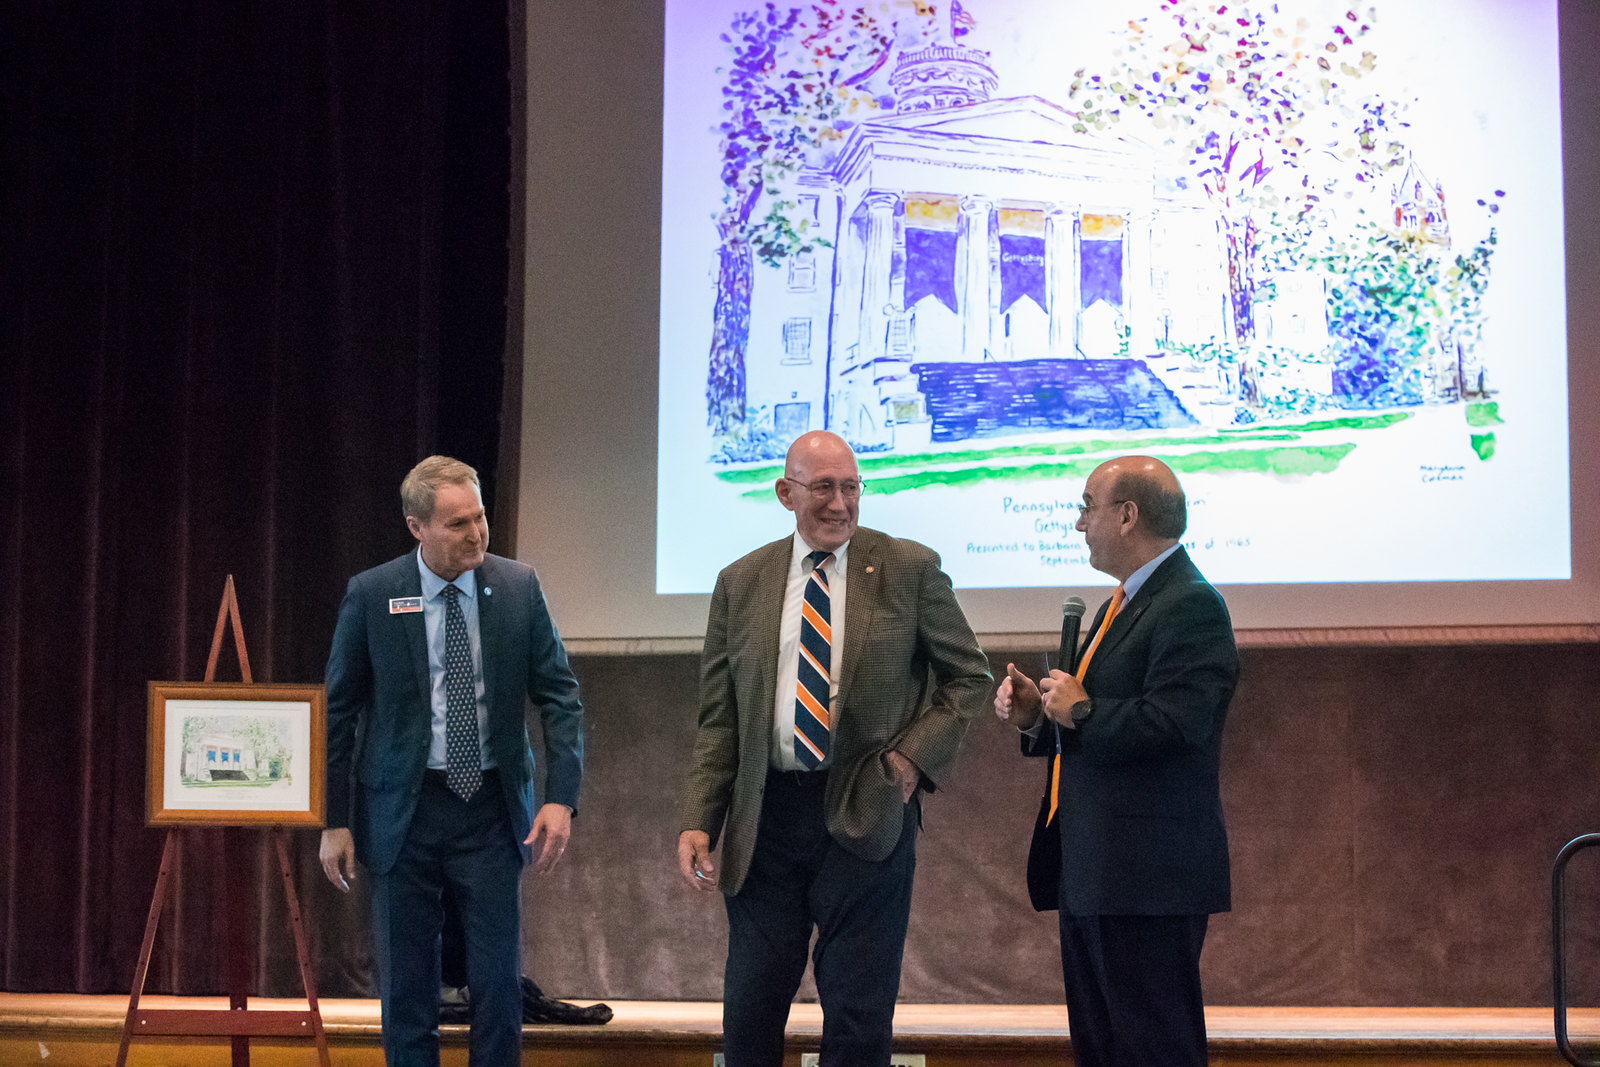 President Bob Iuliano and two others stand before the audience, in front of a projected artist's rendering of Pennsylvania Hall